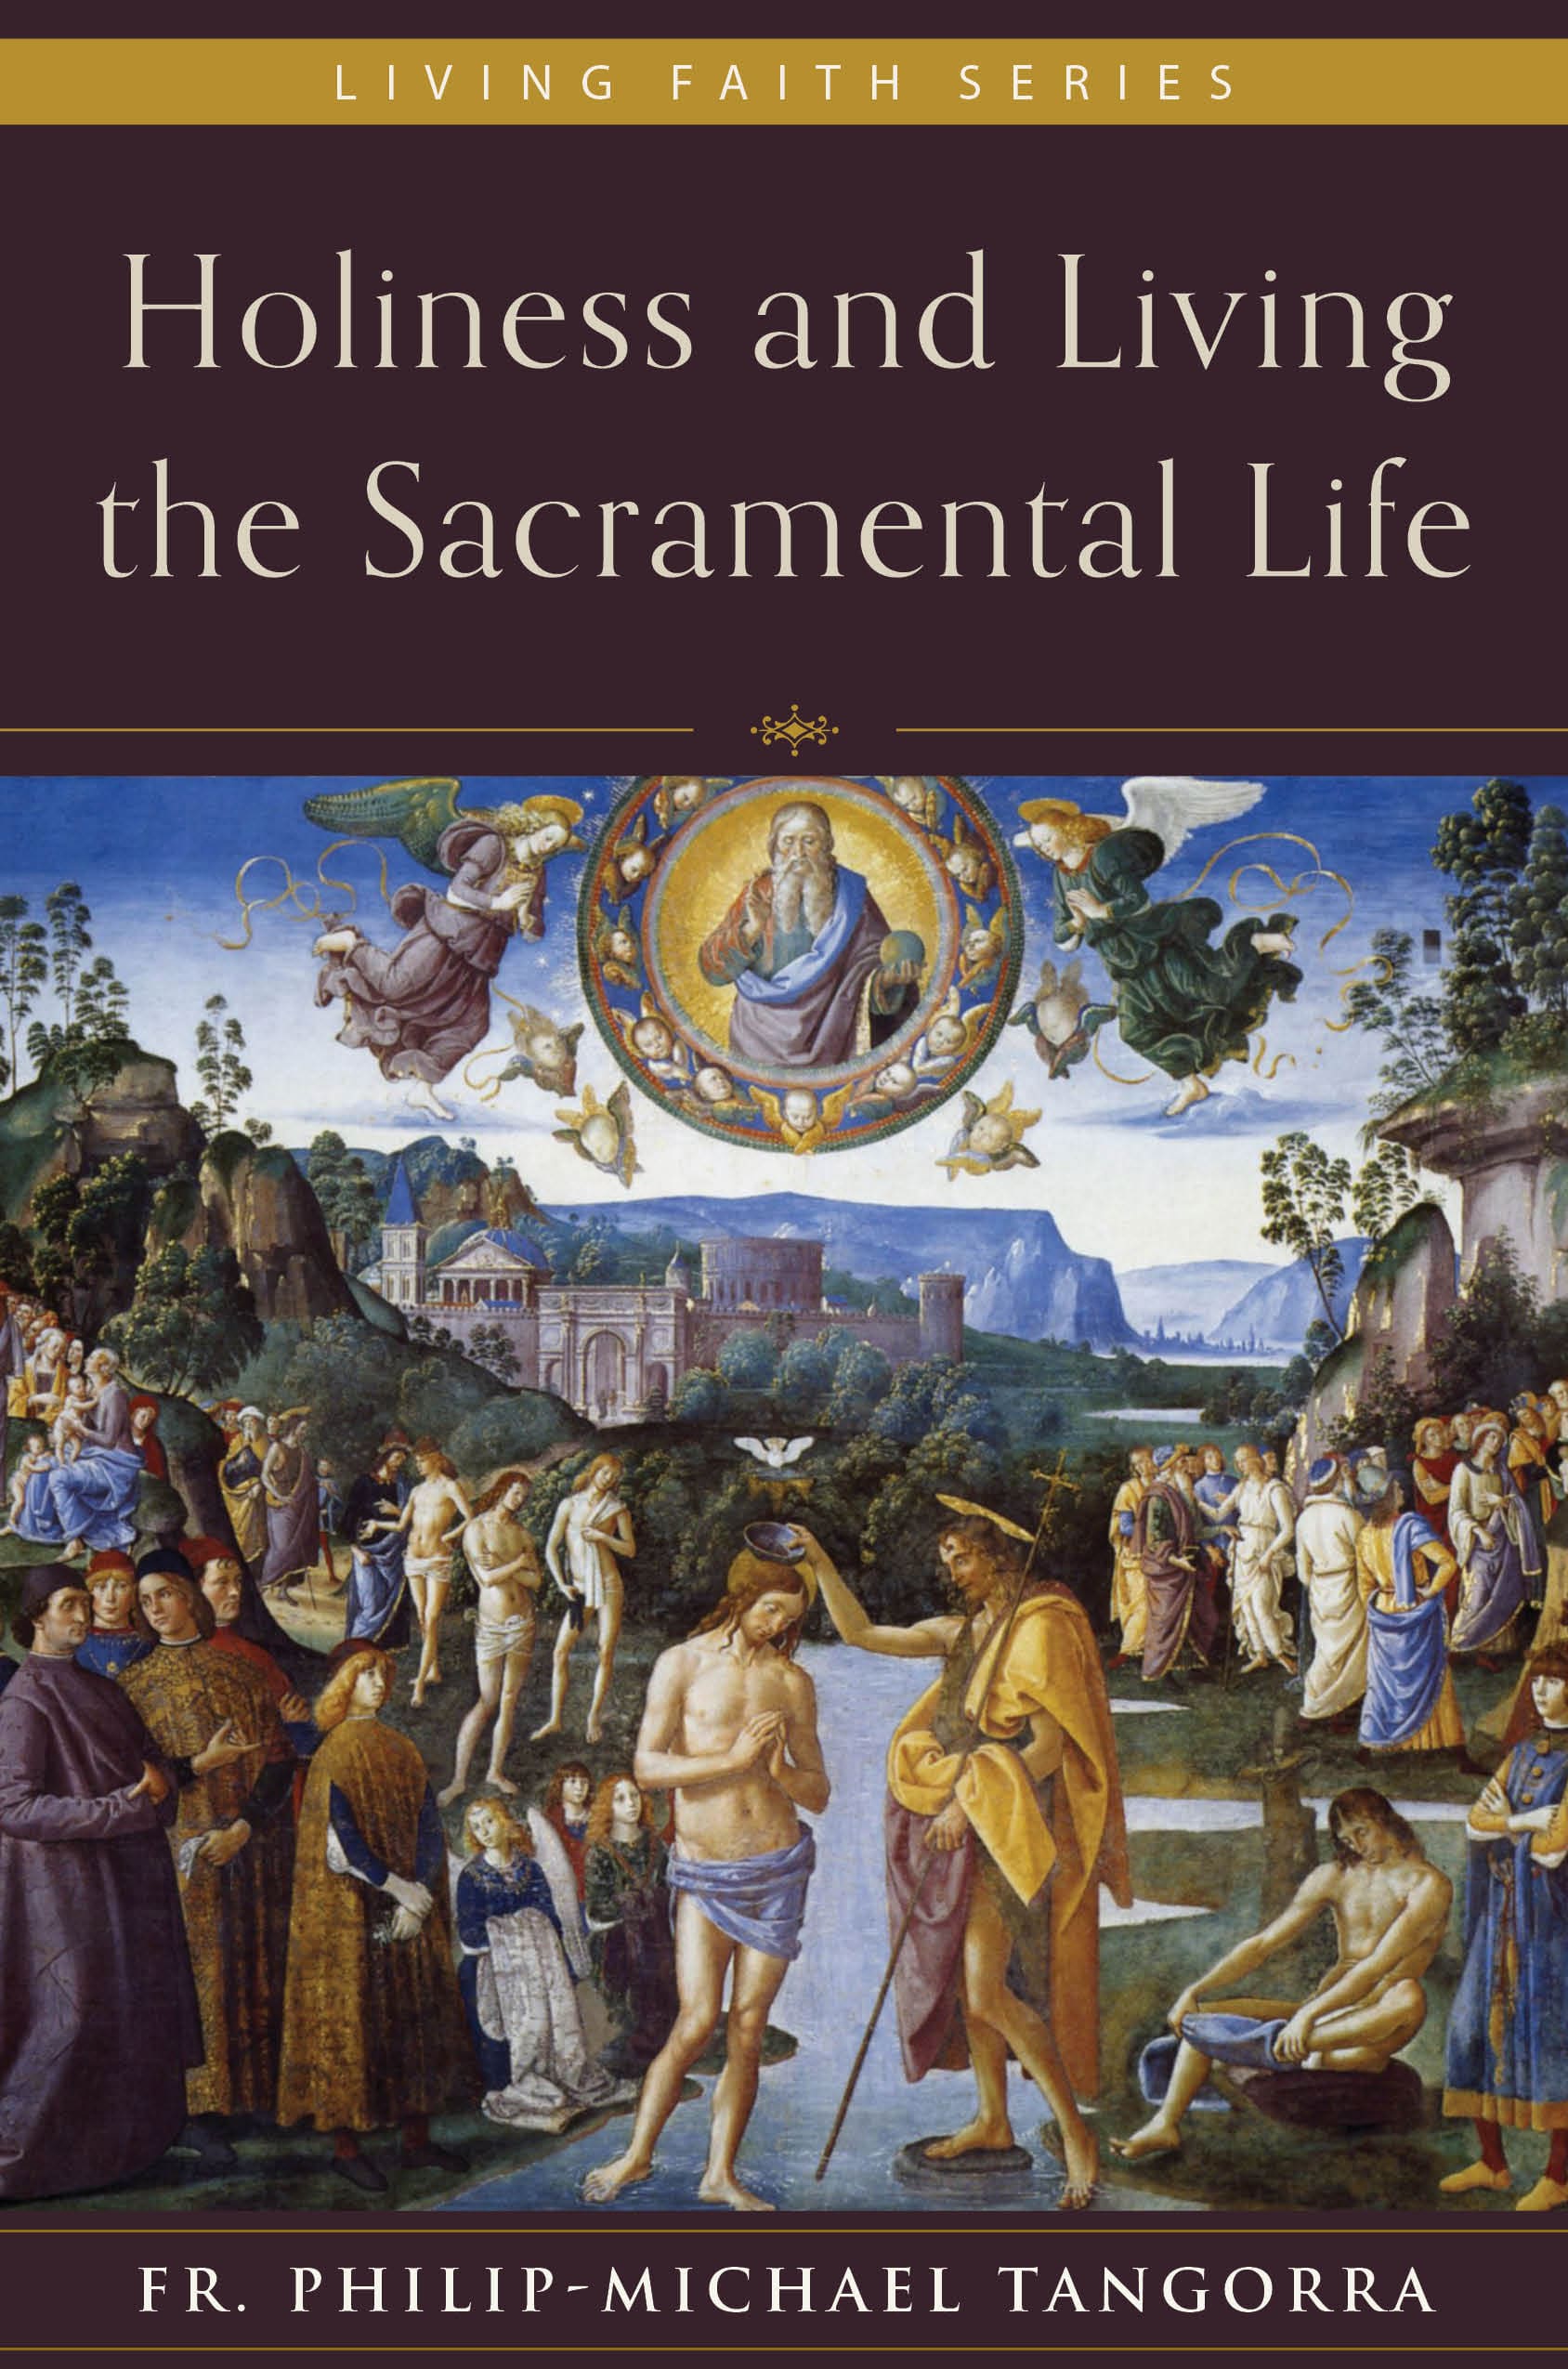 Holiness and the Sacramental Life: A Guidebook for Our Return to God